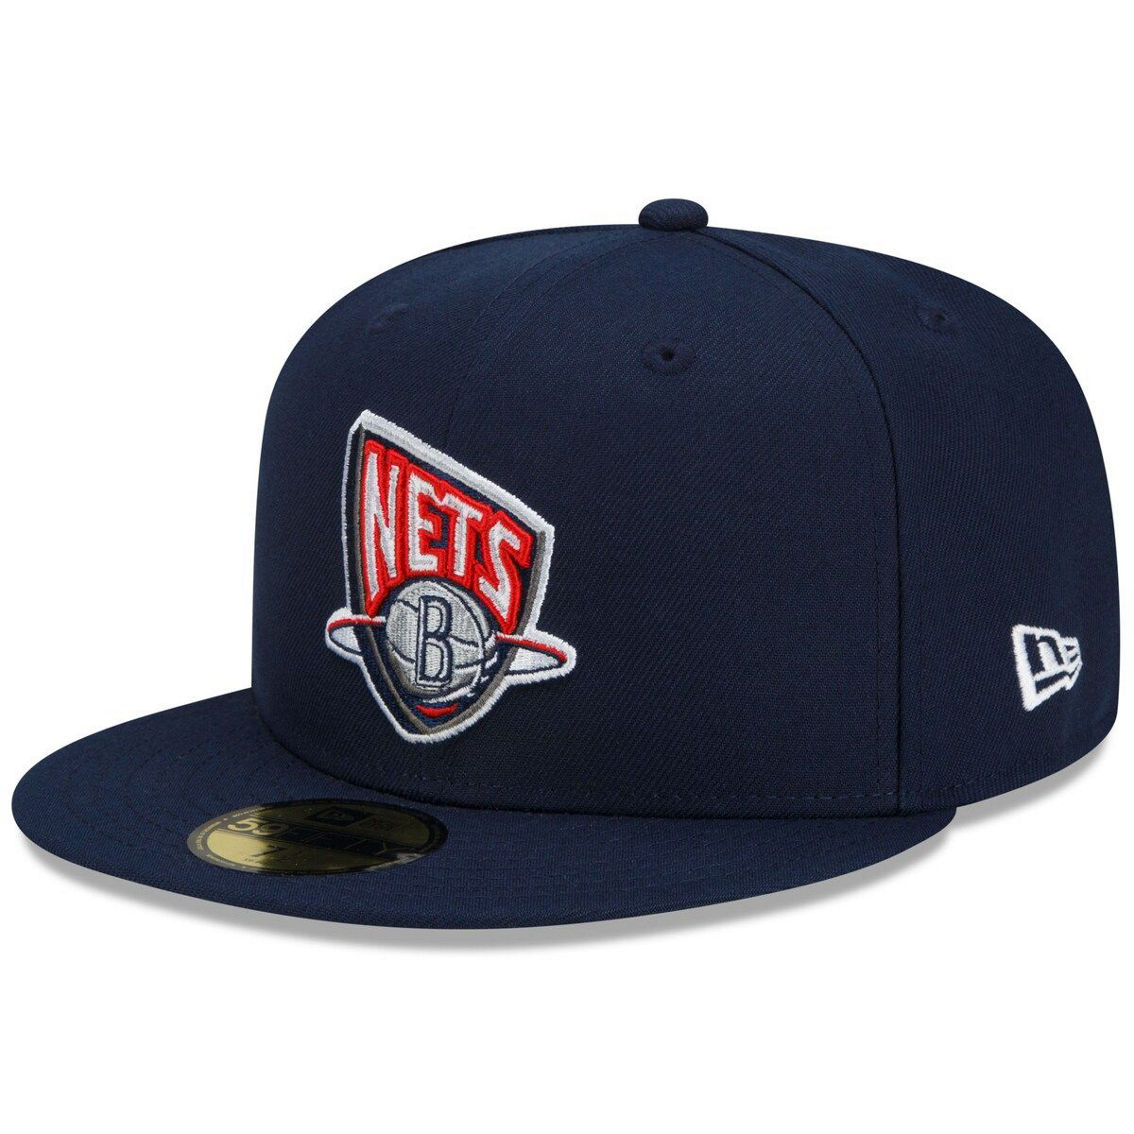 New Era Men's Navy Brooklyn Nets 2021/22 City Edition Alternate 59FIFTY Fitted Hat - Image 2 of 4